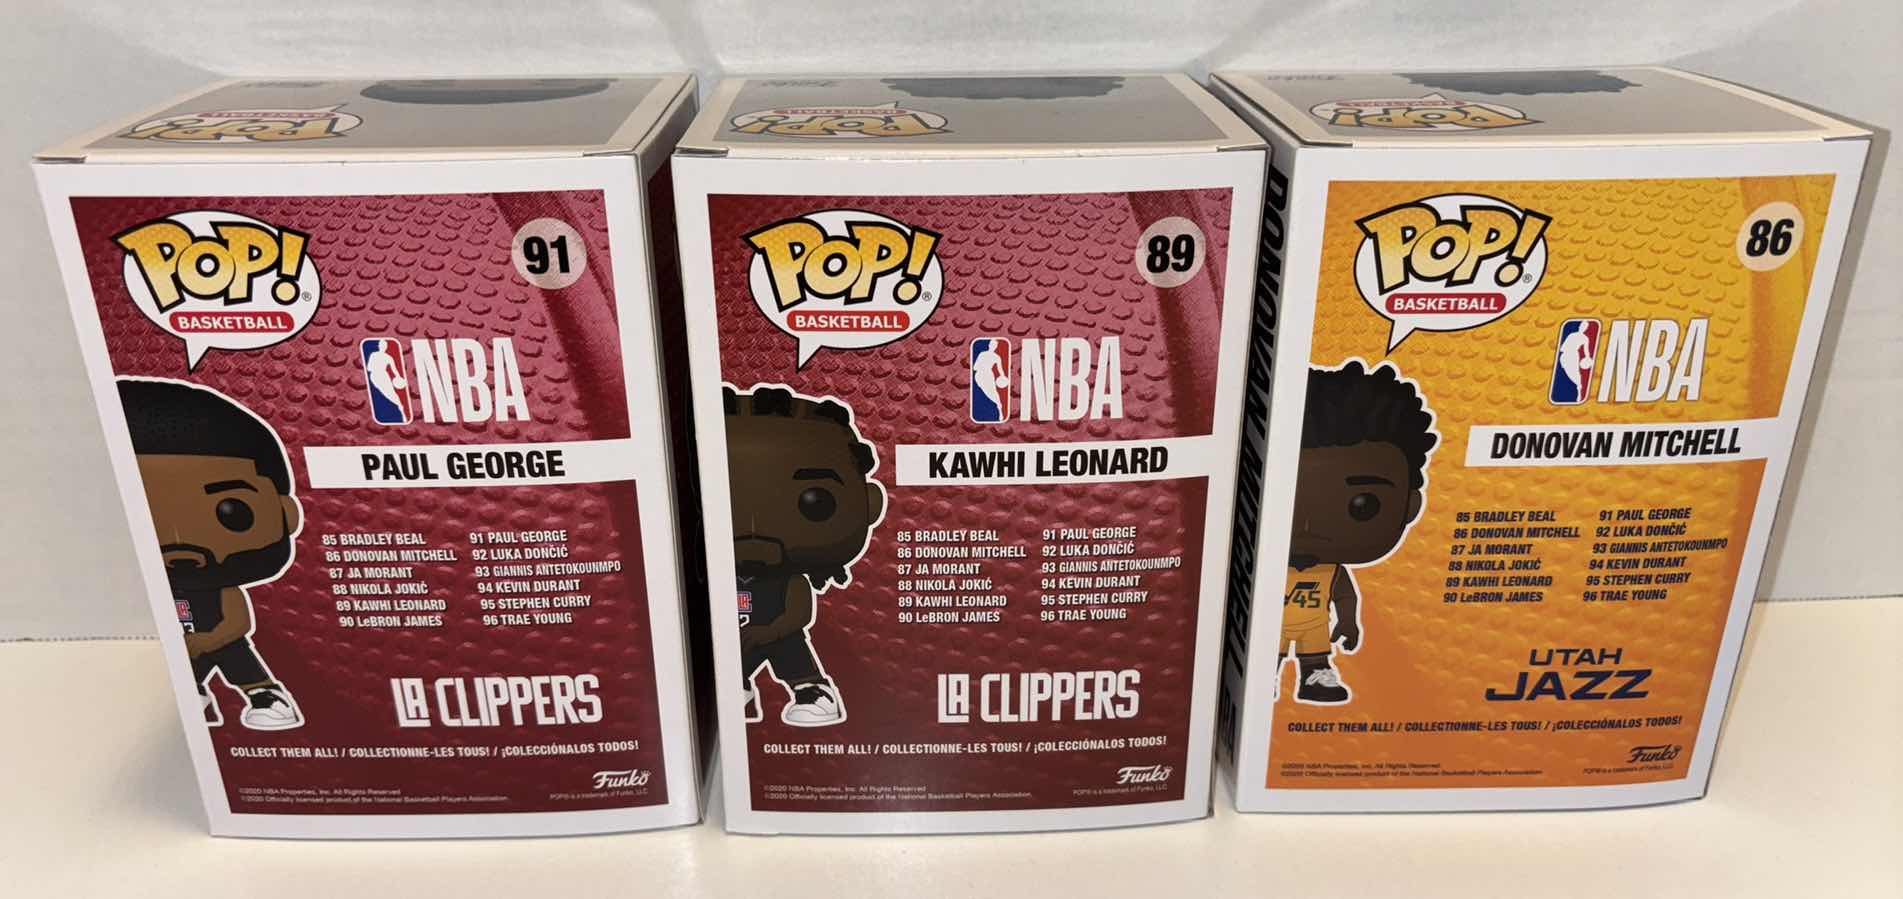 Photo 3 of NEW FUNKO POP! BASKETBALL VINYL FIGURE MIXED 6-PACK, CLIPPERS #91 PAUL GEORGE (3), CLIPPERS #89 KAWHI LEONARD (2), JAZZ #86 DONOVAN MITCHELL (1)